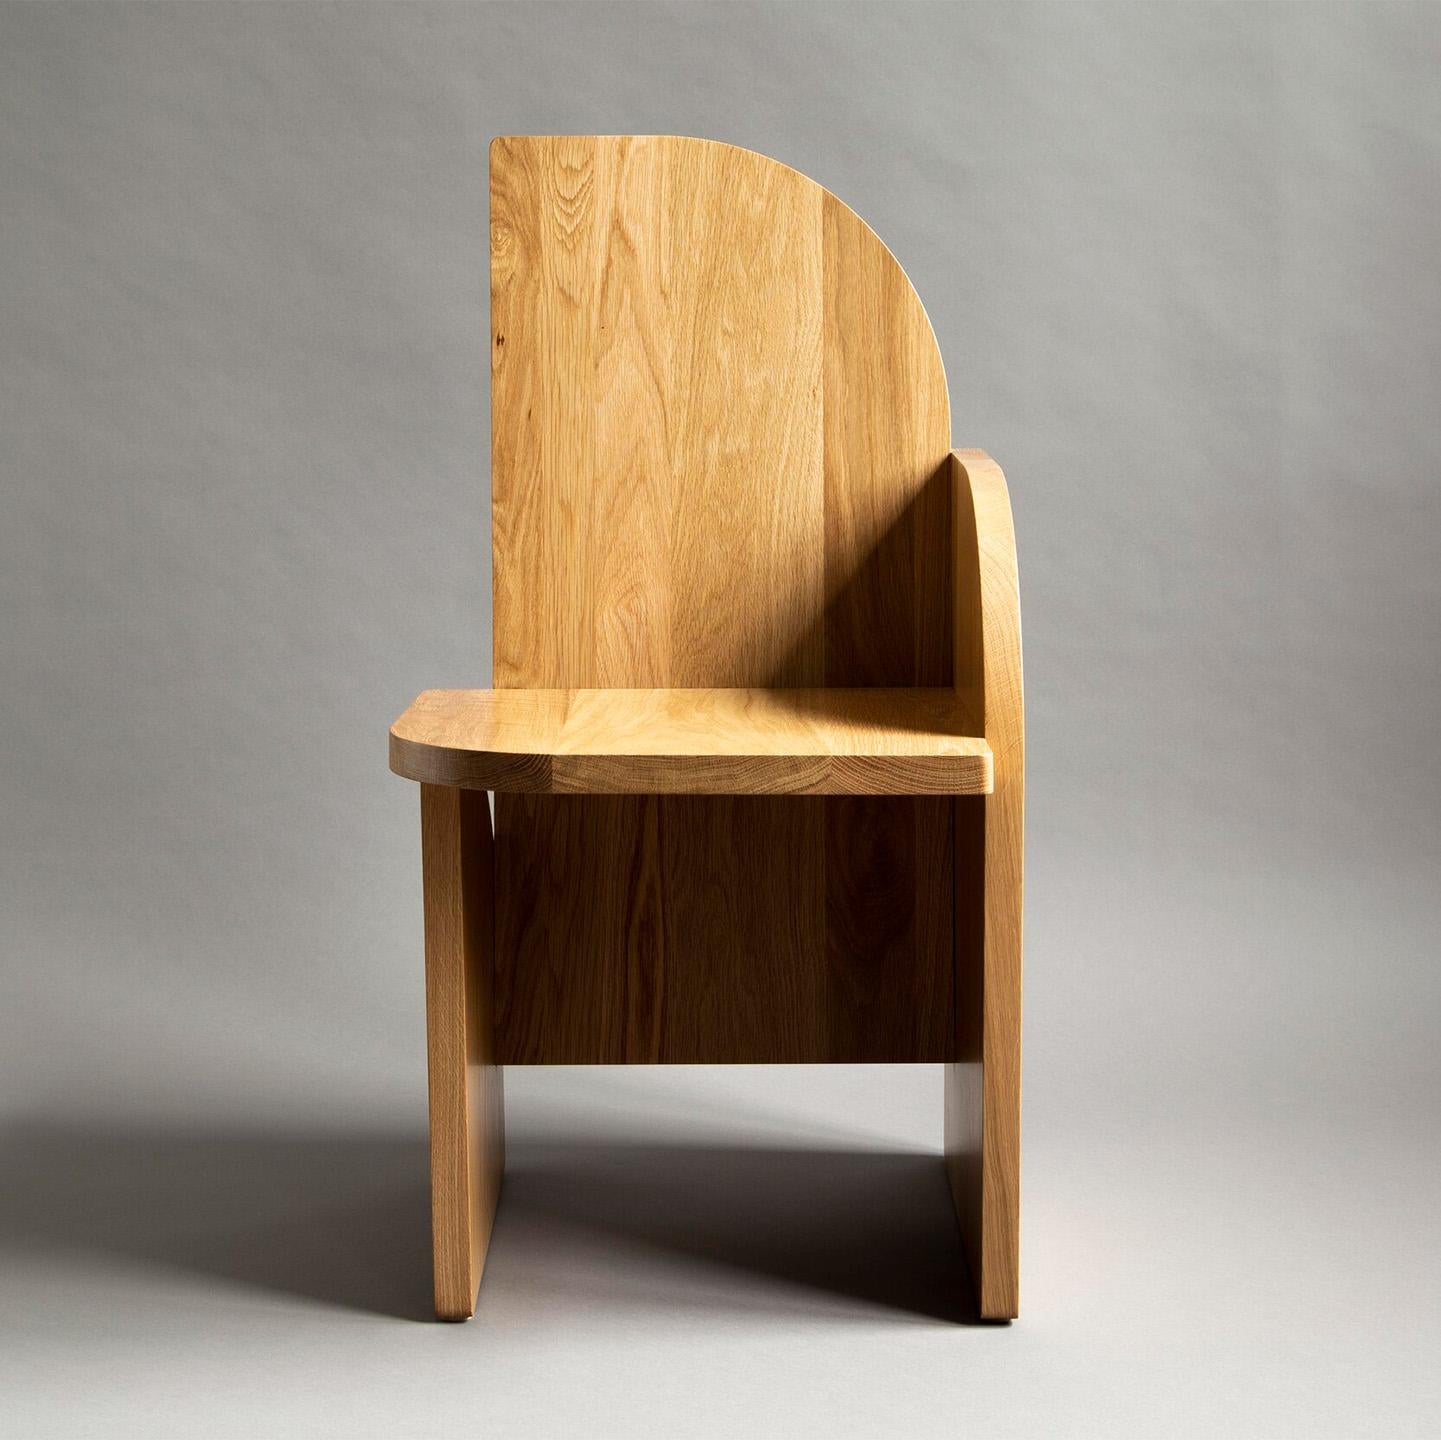 The Bluff side chair is an homage to the foothills surrounding Luft Tanaka's hometown of Kasugai, Japan. Poetic and architectural; planar yet curvy, the Bluff side chairs are sculptural accents that you can sit on. Each chair is handcrafted and